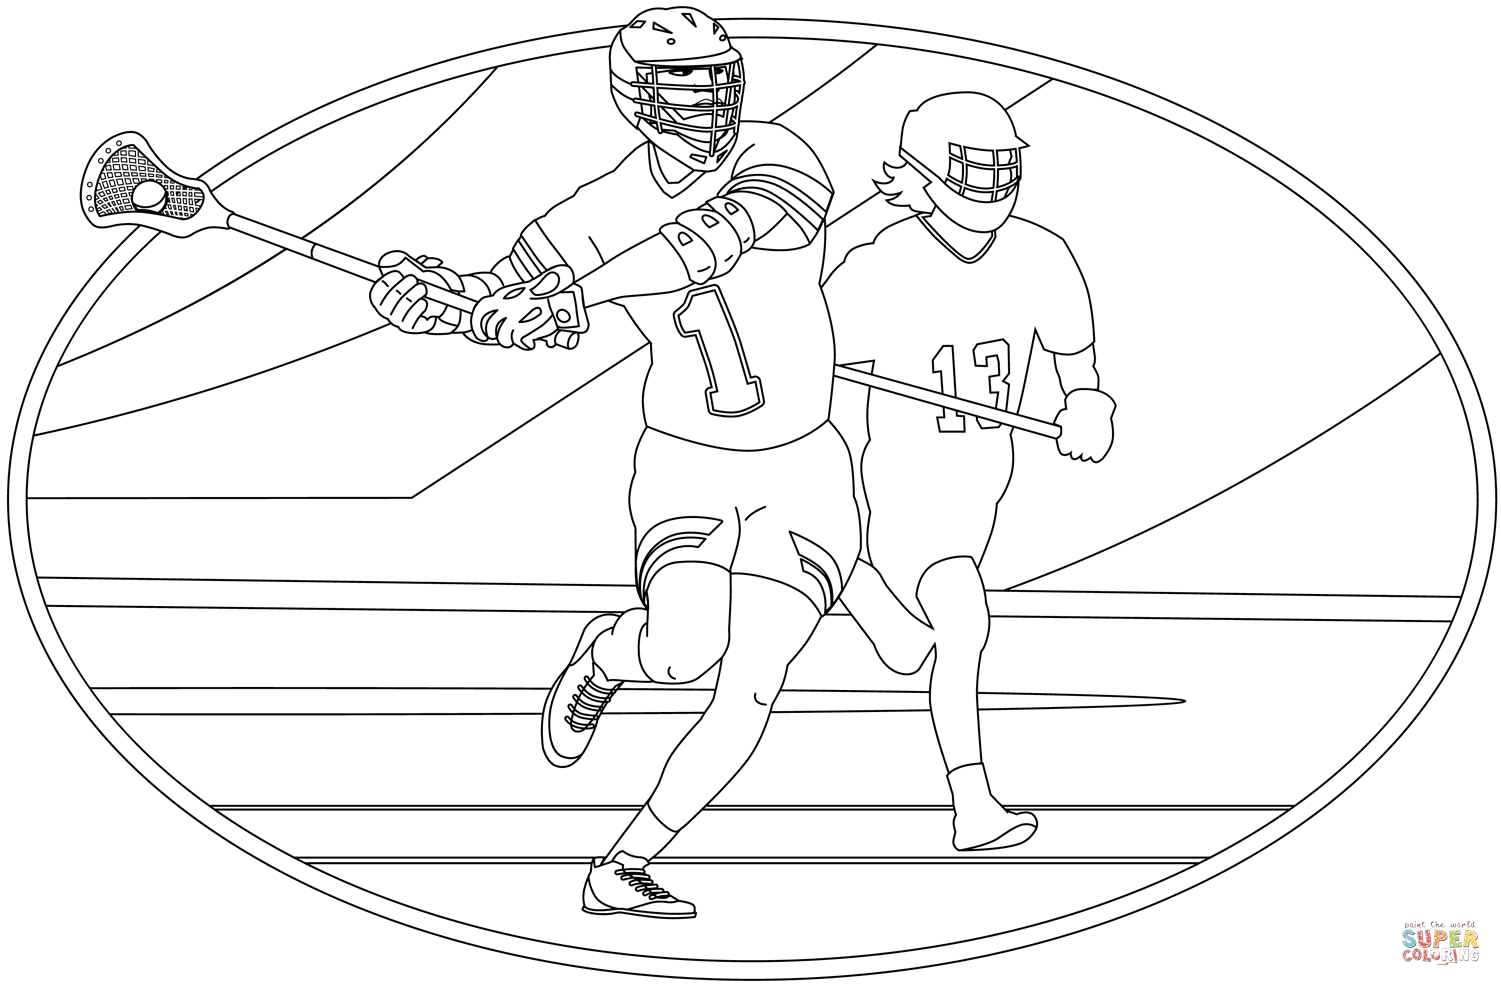 Lacrosse coloring page free printable coloring pages